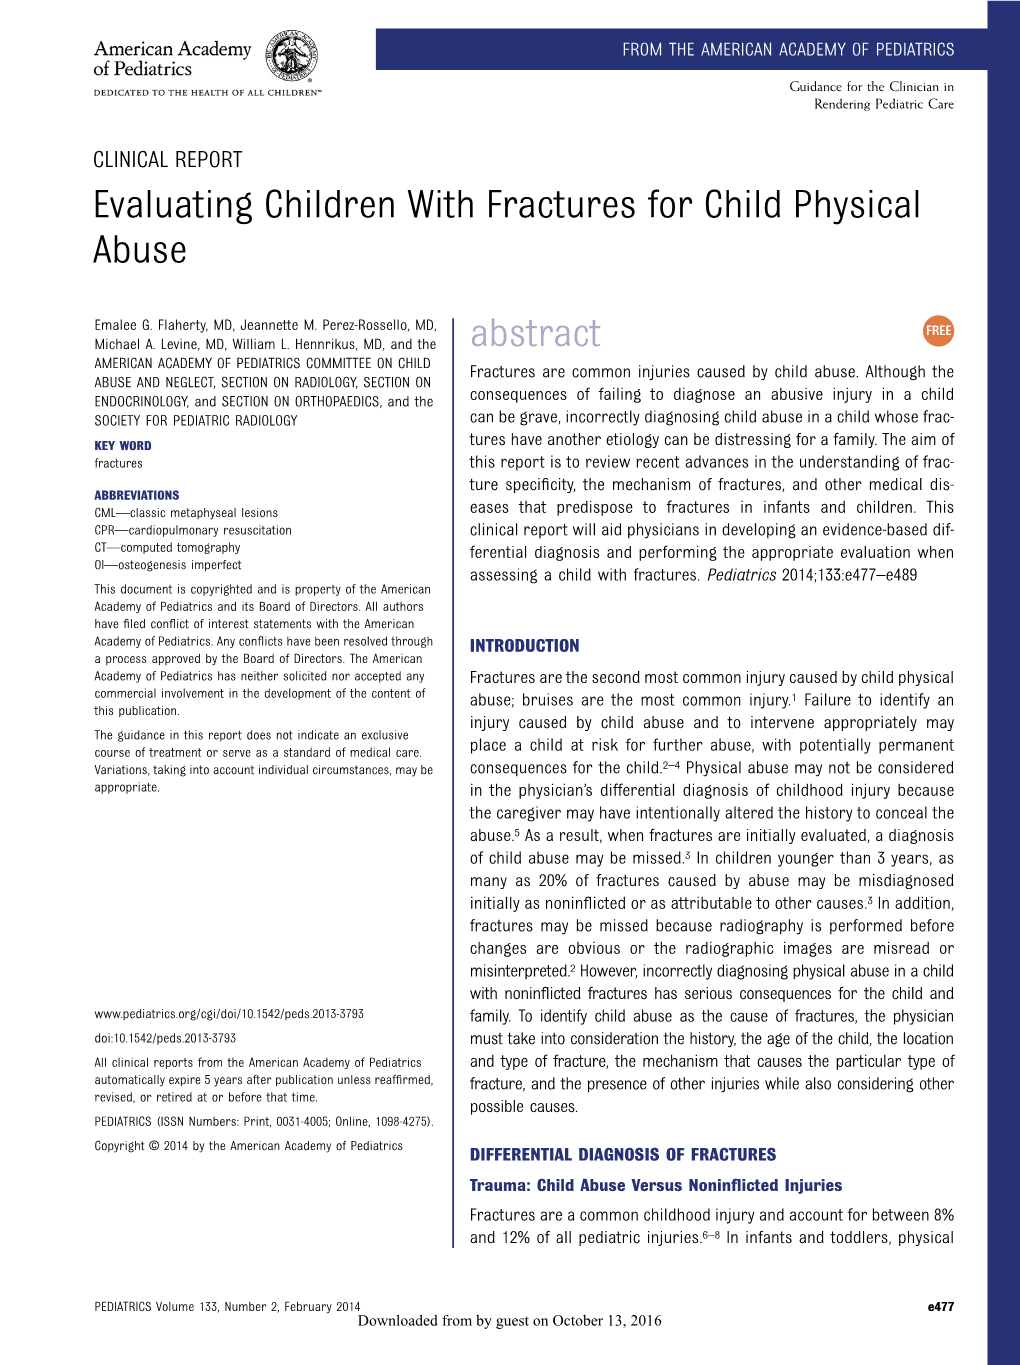 Evaluating Children with Fractures for Child Physical Abuse Abstract